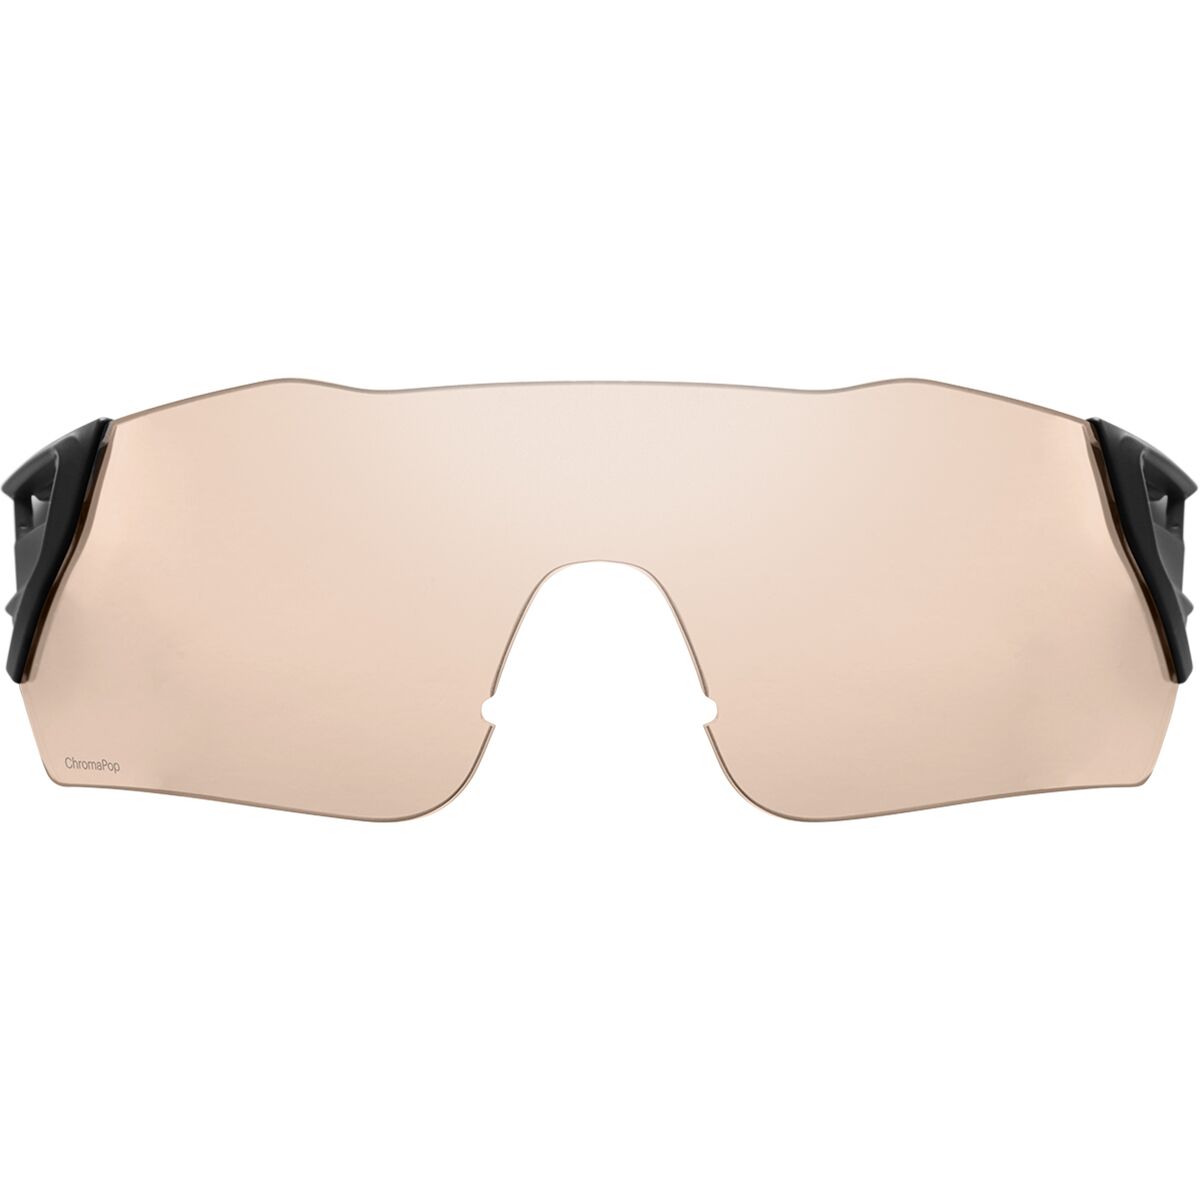 Smith Attack MAG Sunglasses Replacement Lens